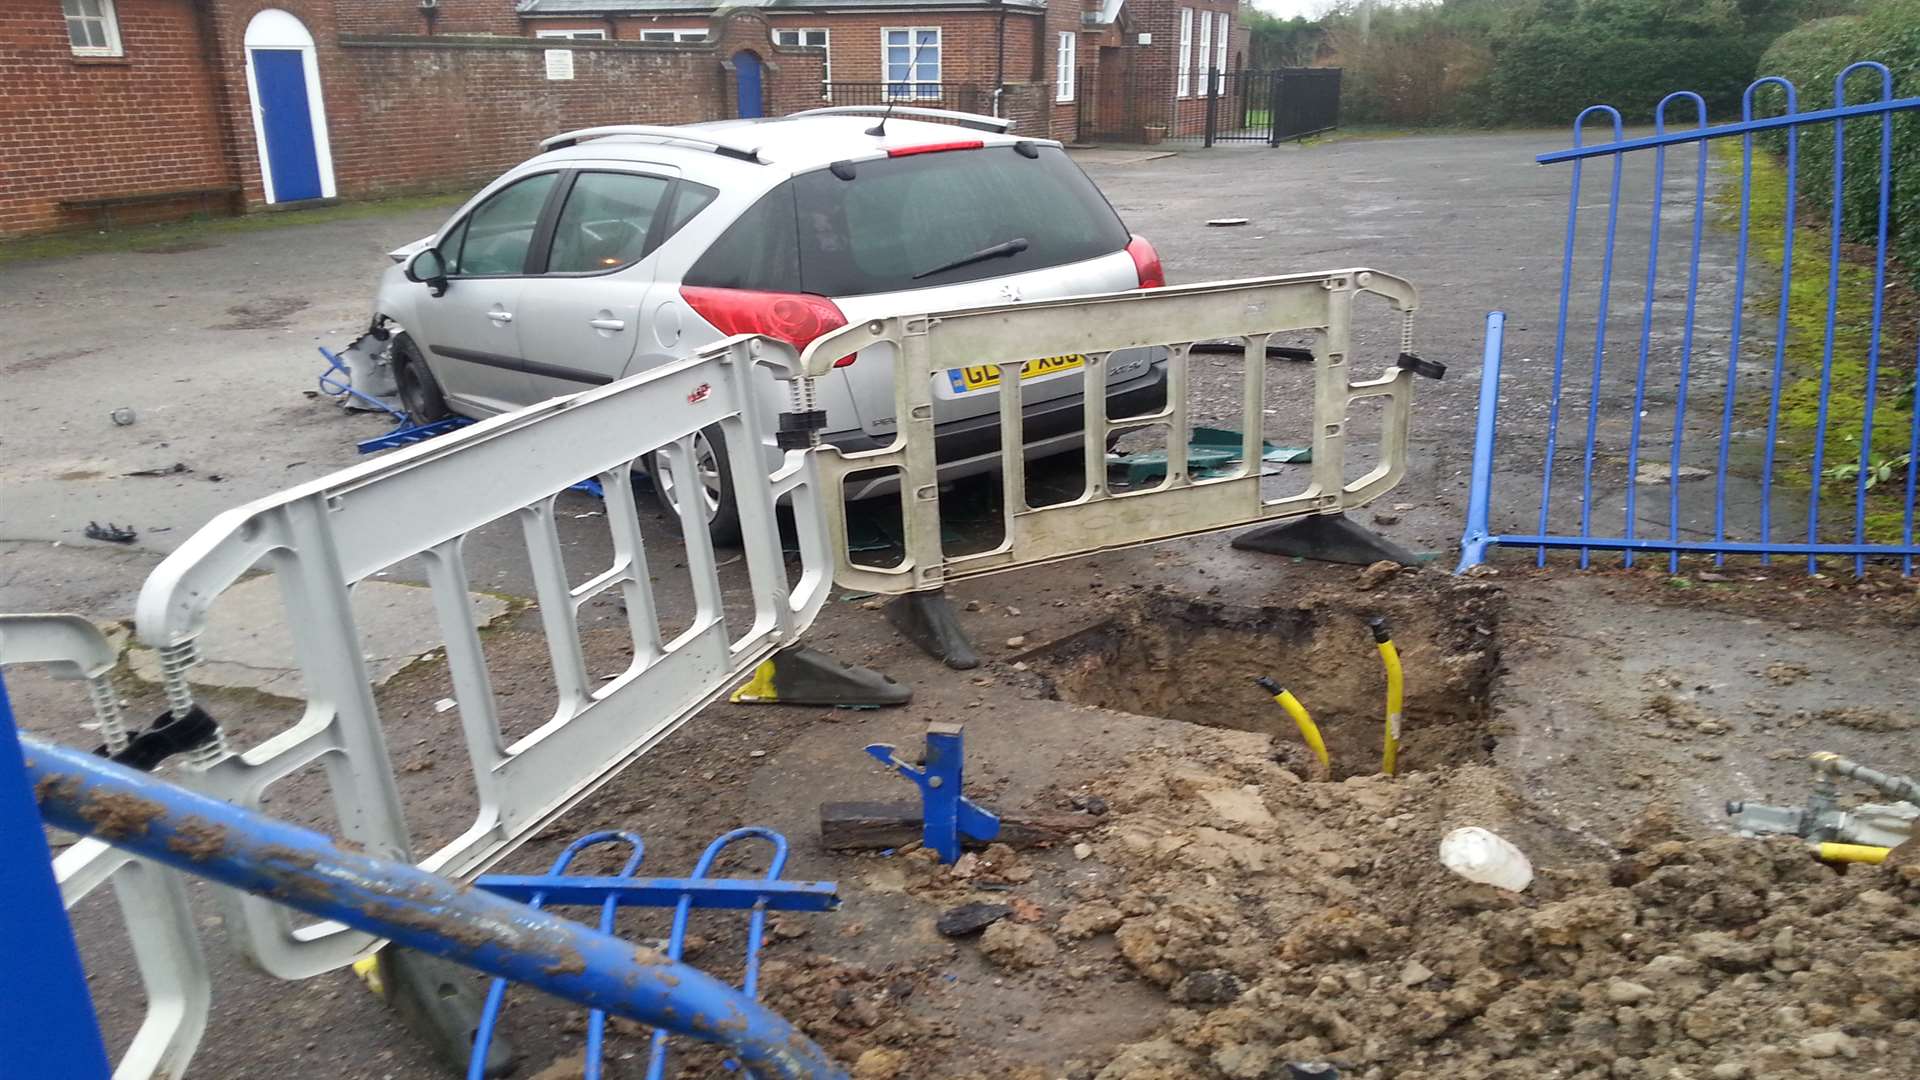 The Peugeot left the road and hit a gas main. Picture: Chris Davey